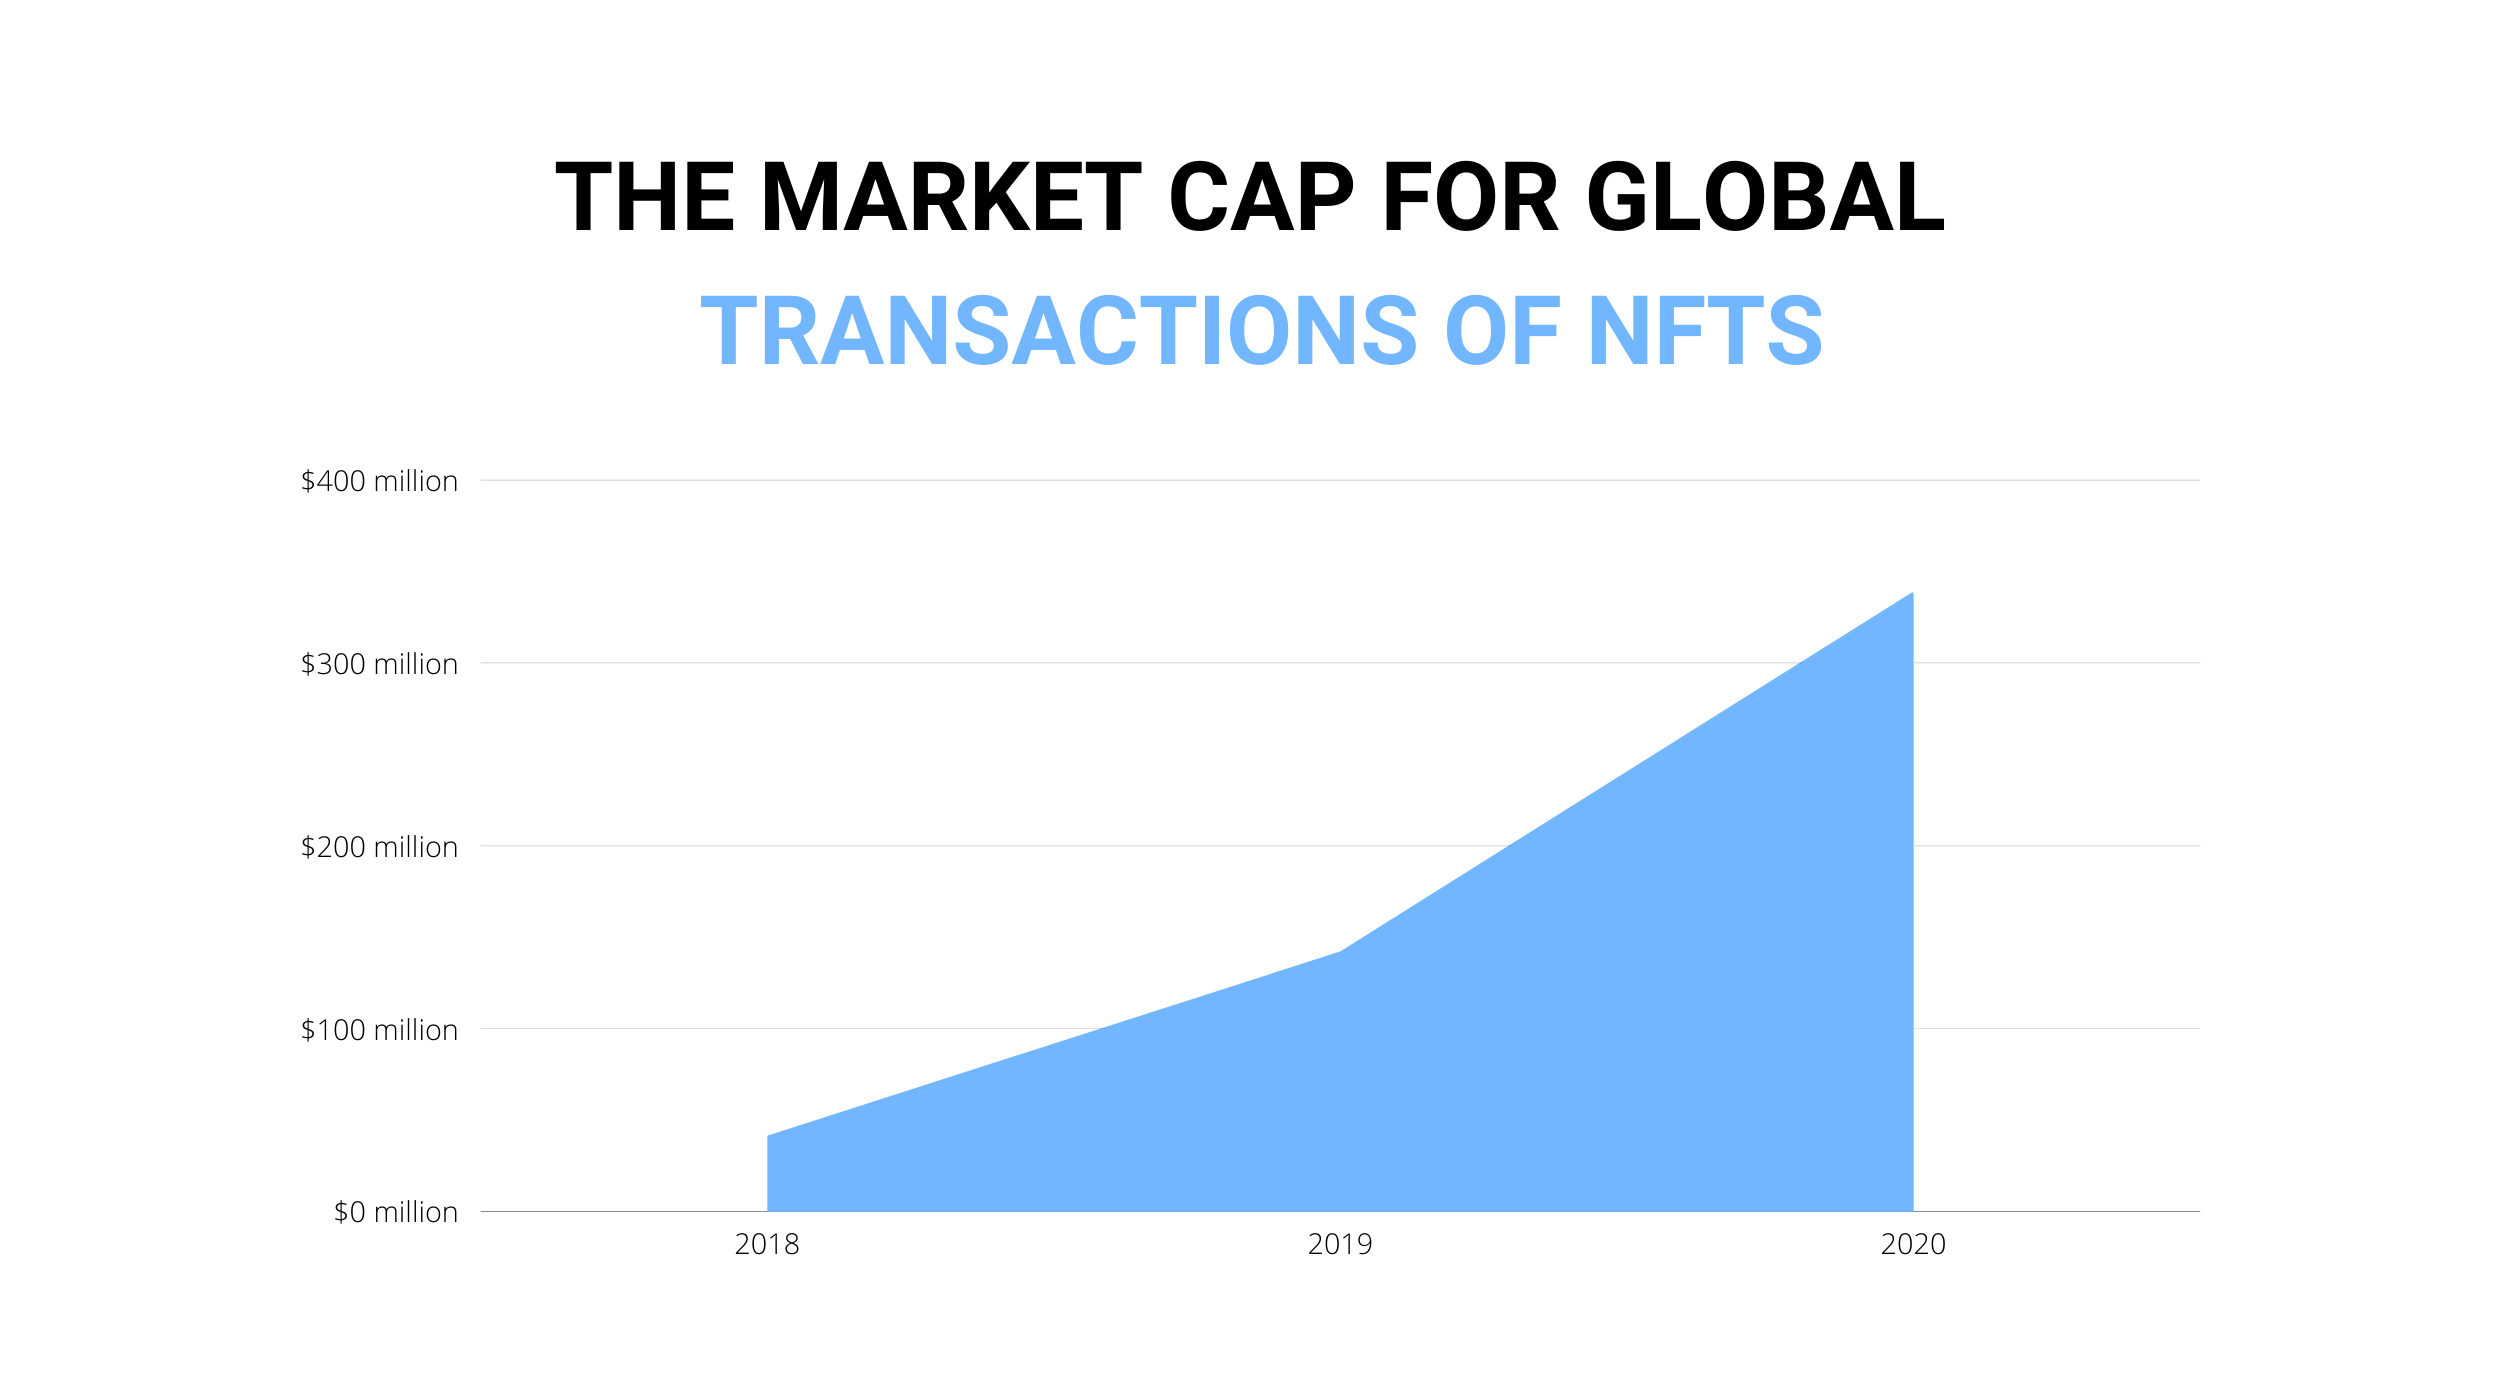 The market cap for global transactions of NFTS